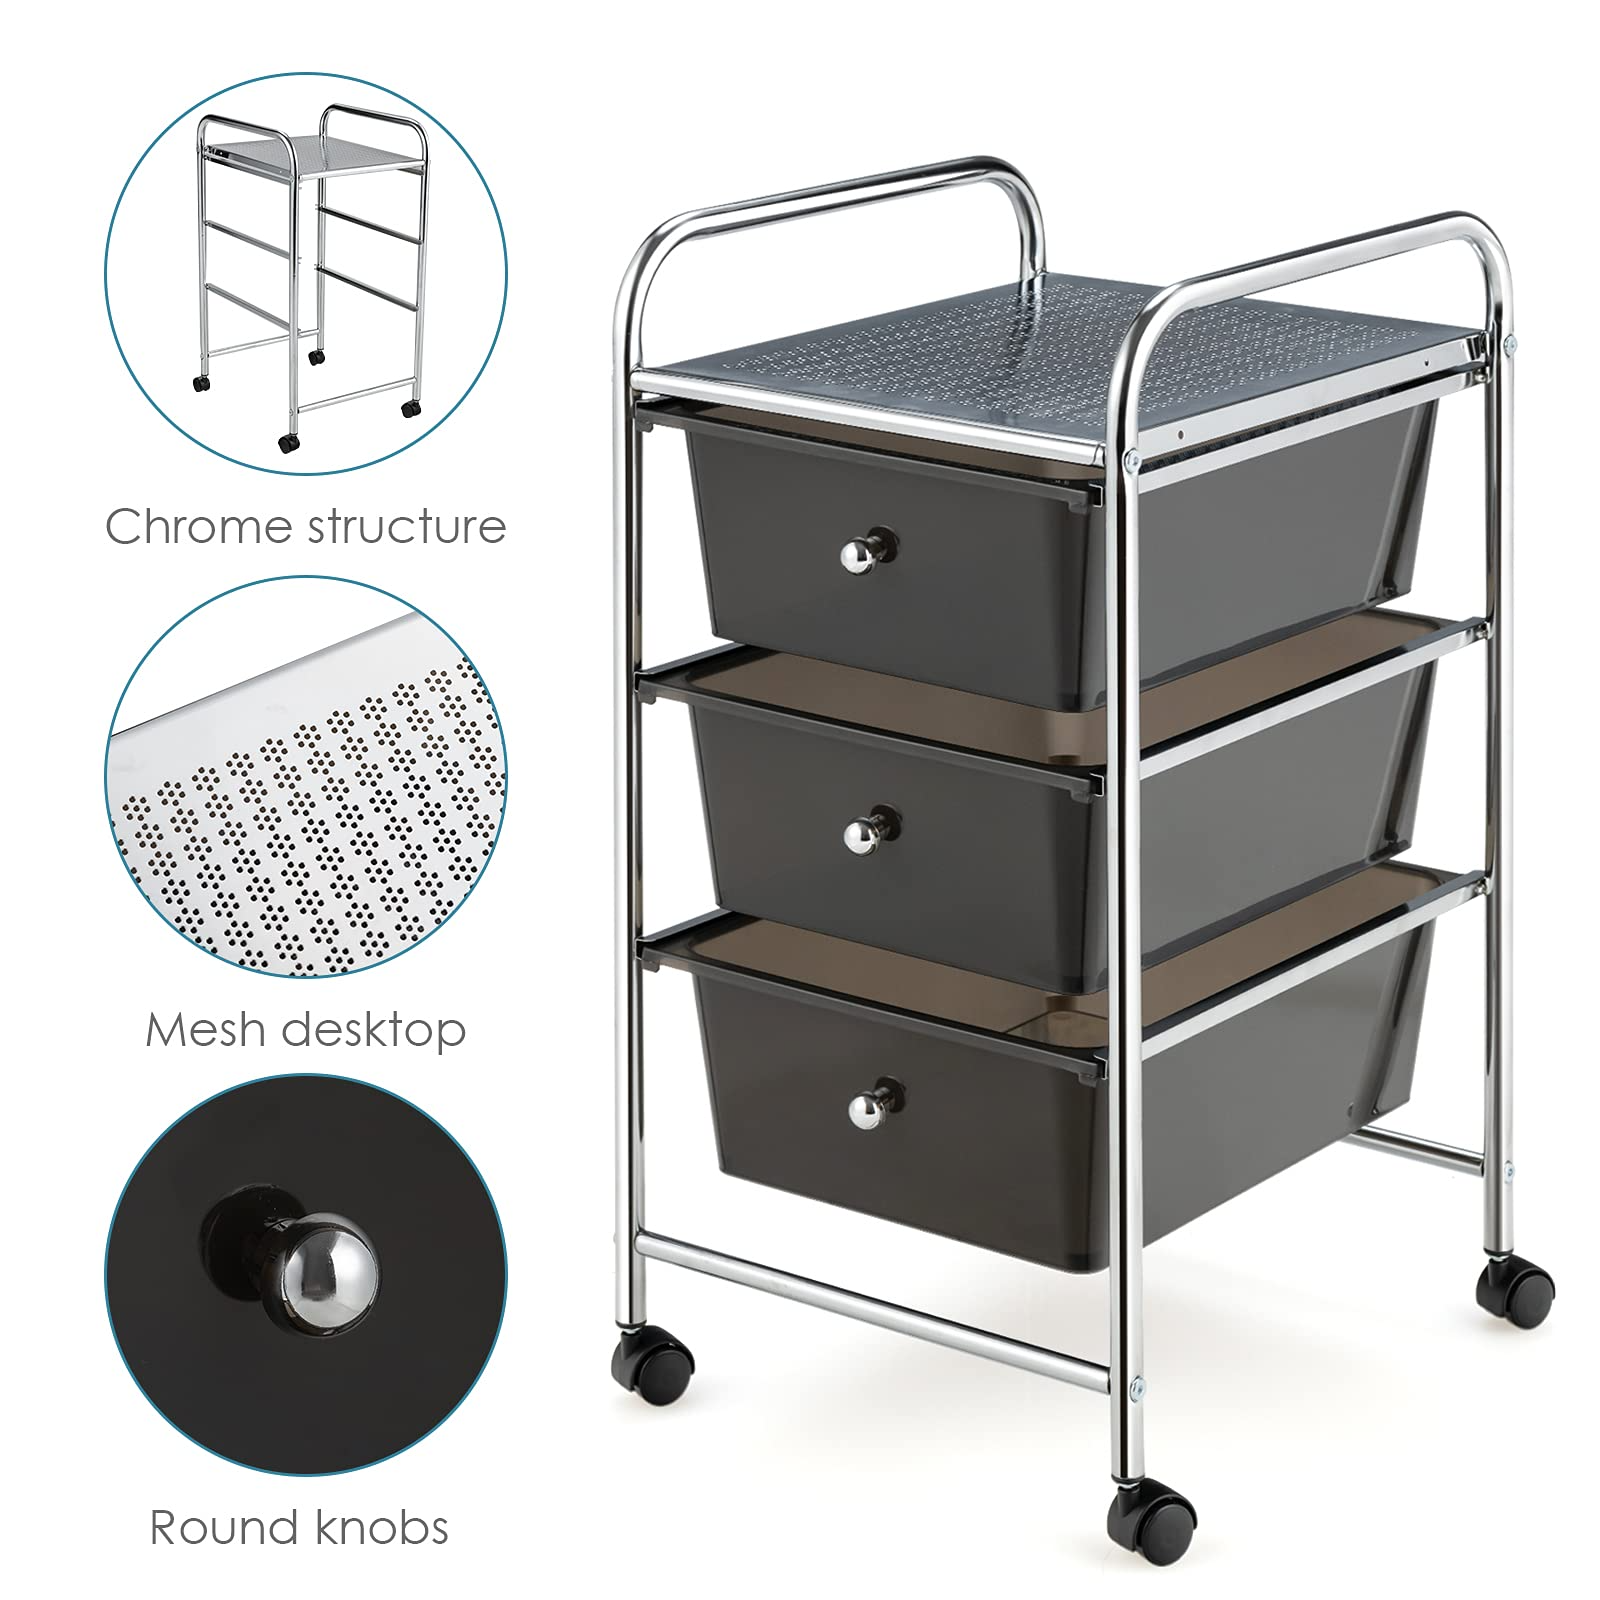 Giantex Rolling Cart with Drawers, Craft Organizer with Wheels, 3 Drawer Storage Container Bins